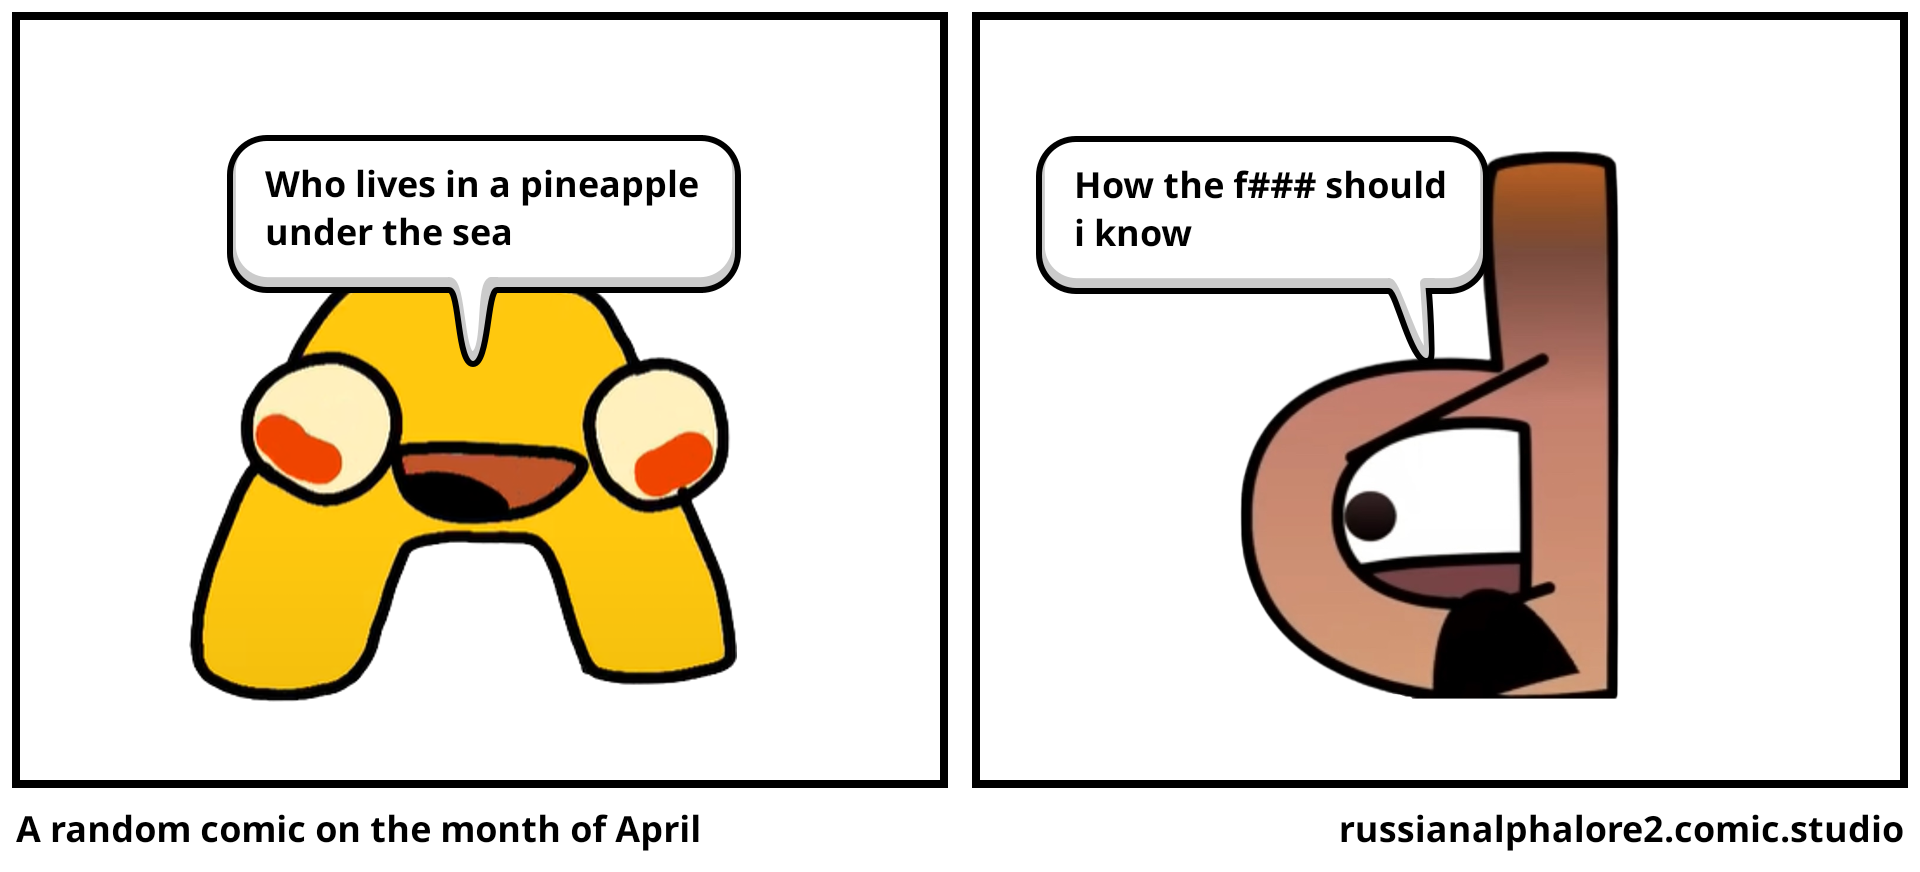 A random comic on the month of April